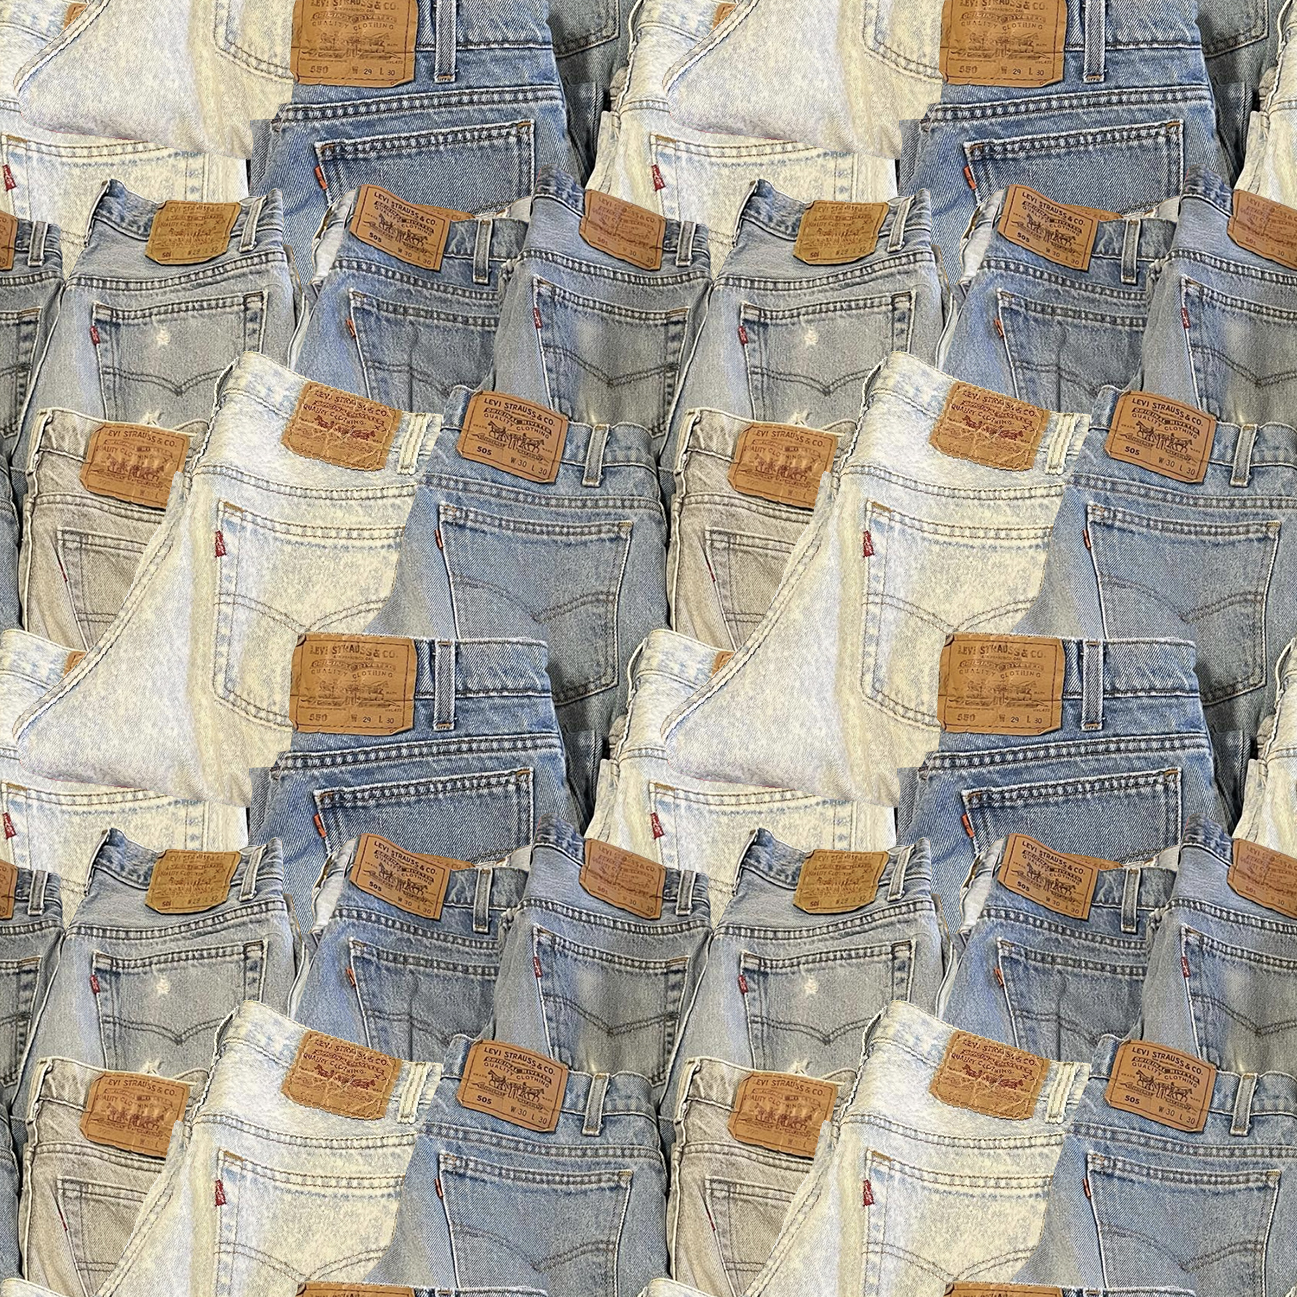 Scrolling image of pile of vintage Levi jeans